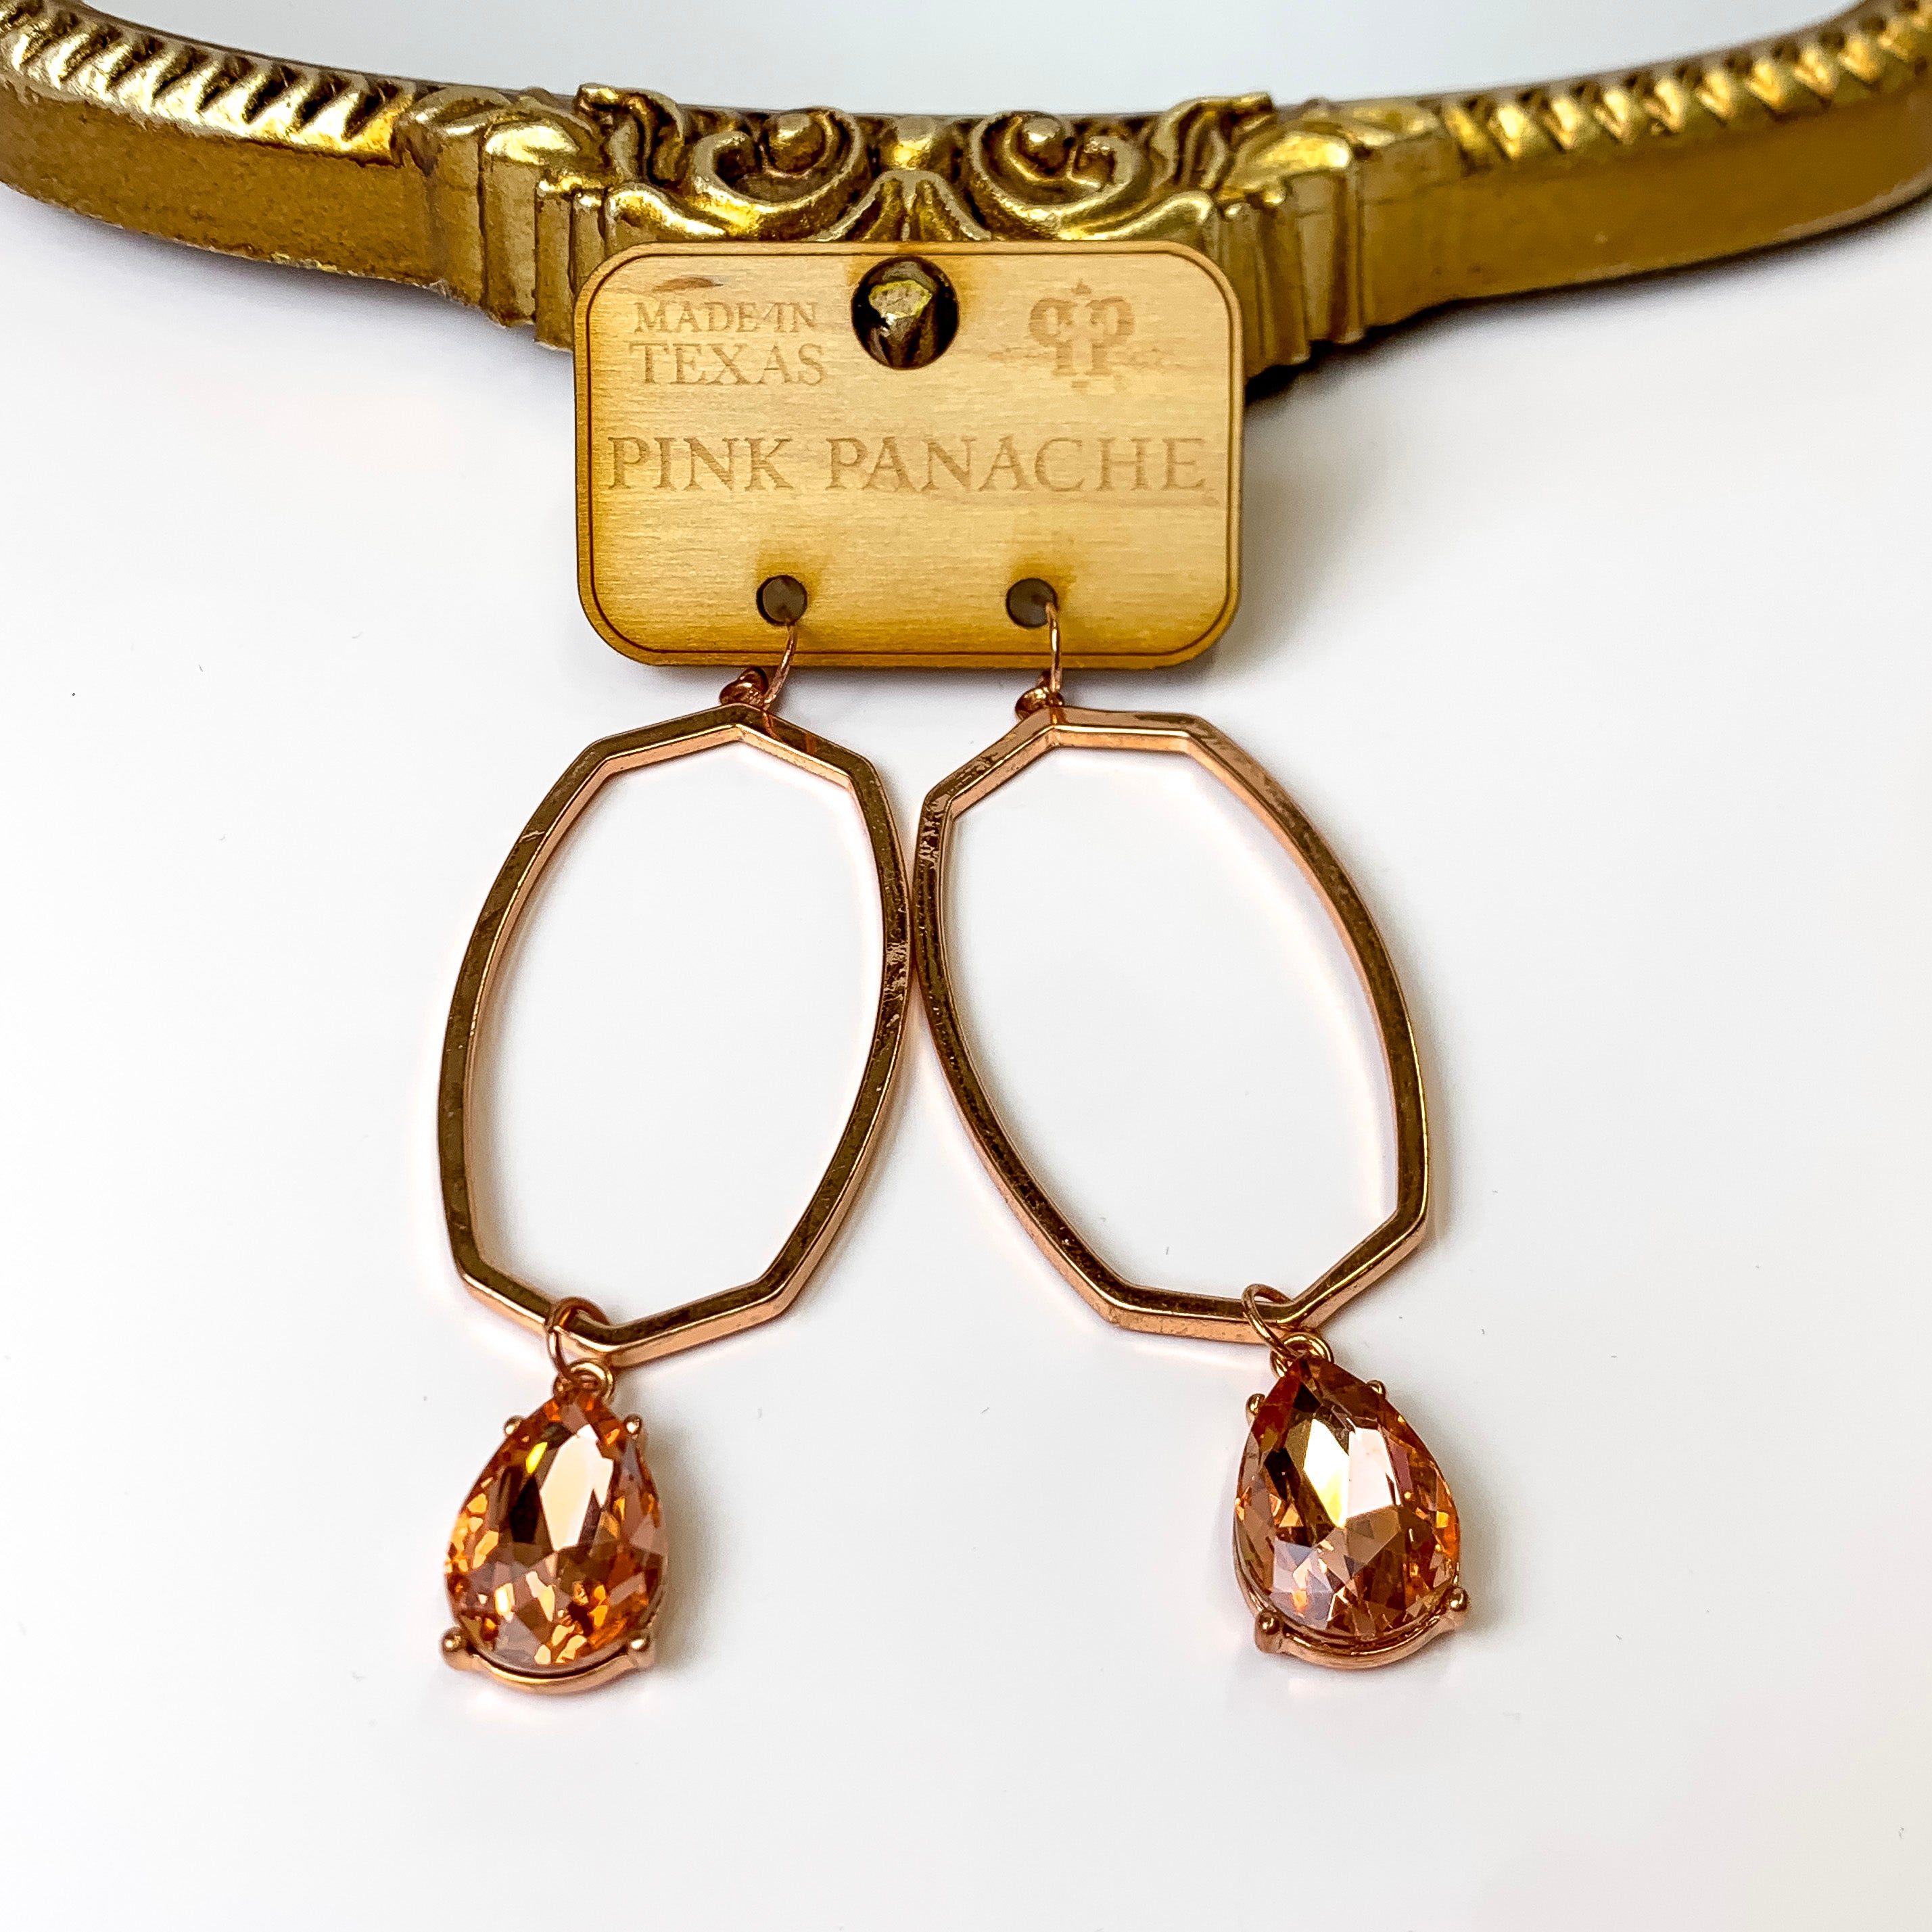 Pink Panache | Open Oval Earrings with Crystal Teardrop Dangle in Rose Gold Tone - Giddy Up Glamour Boutique